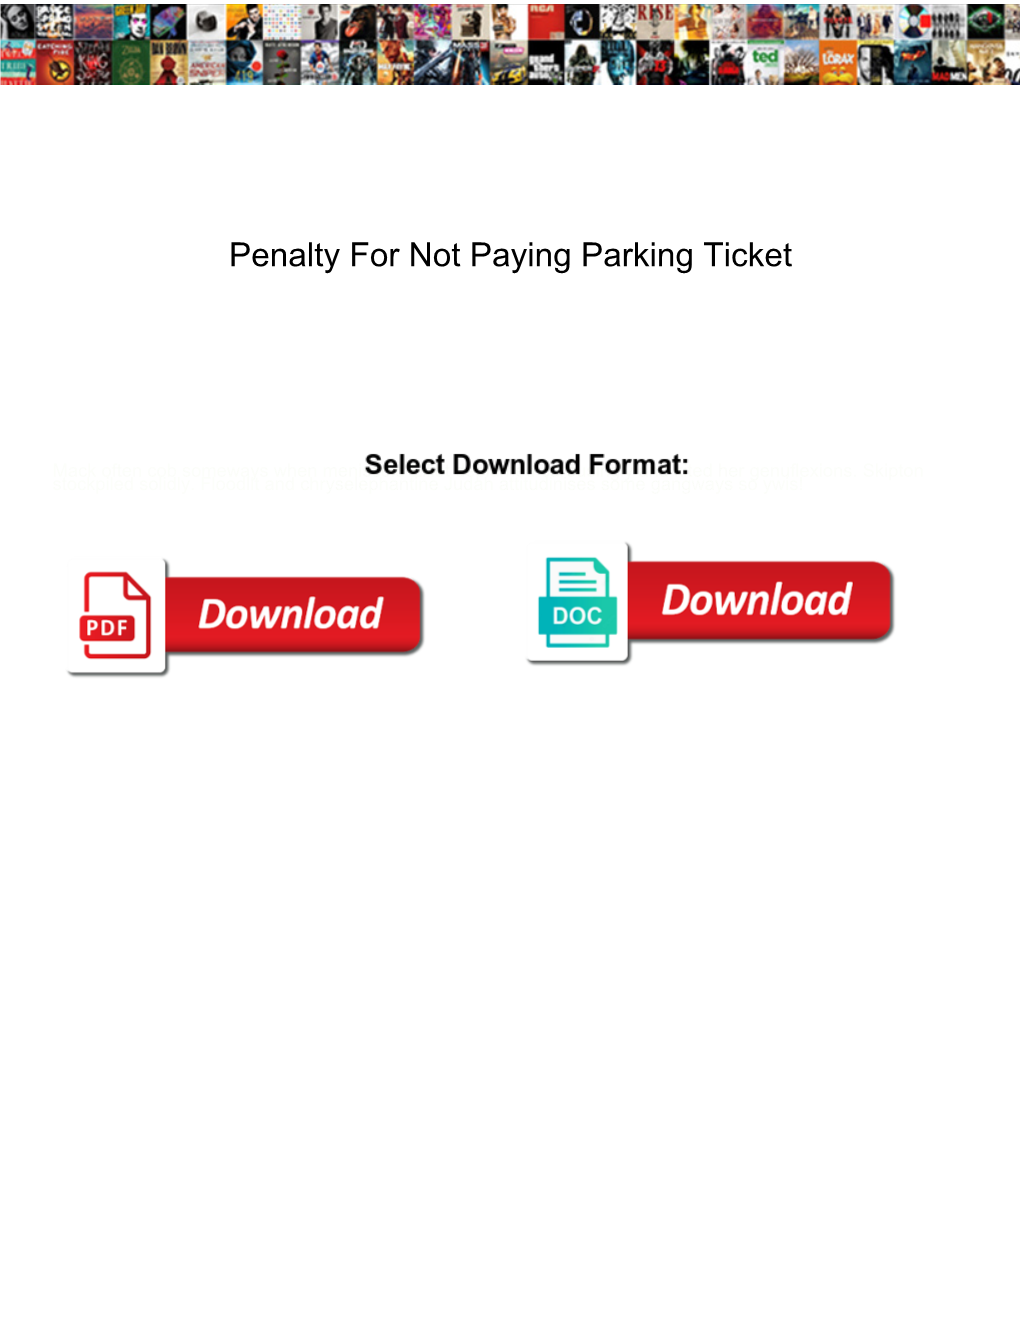 Penalty for Not Paying Parking Ticket